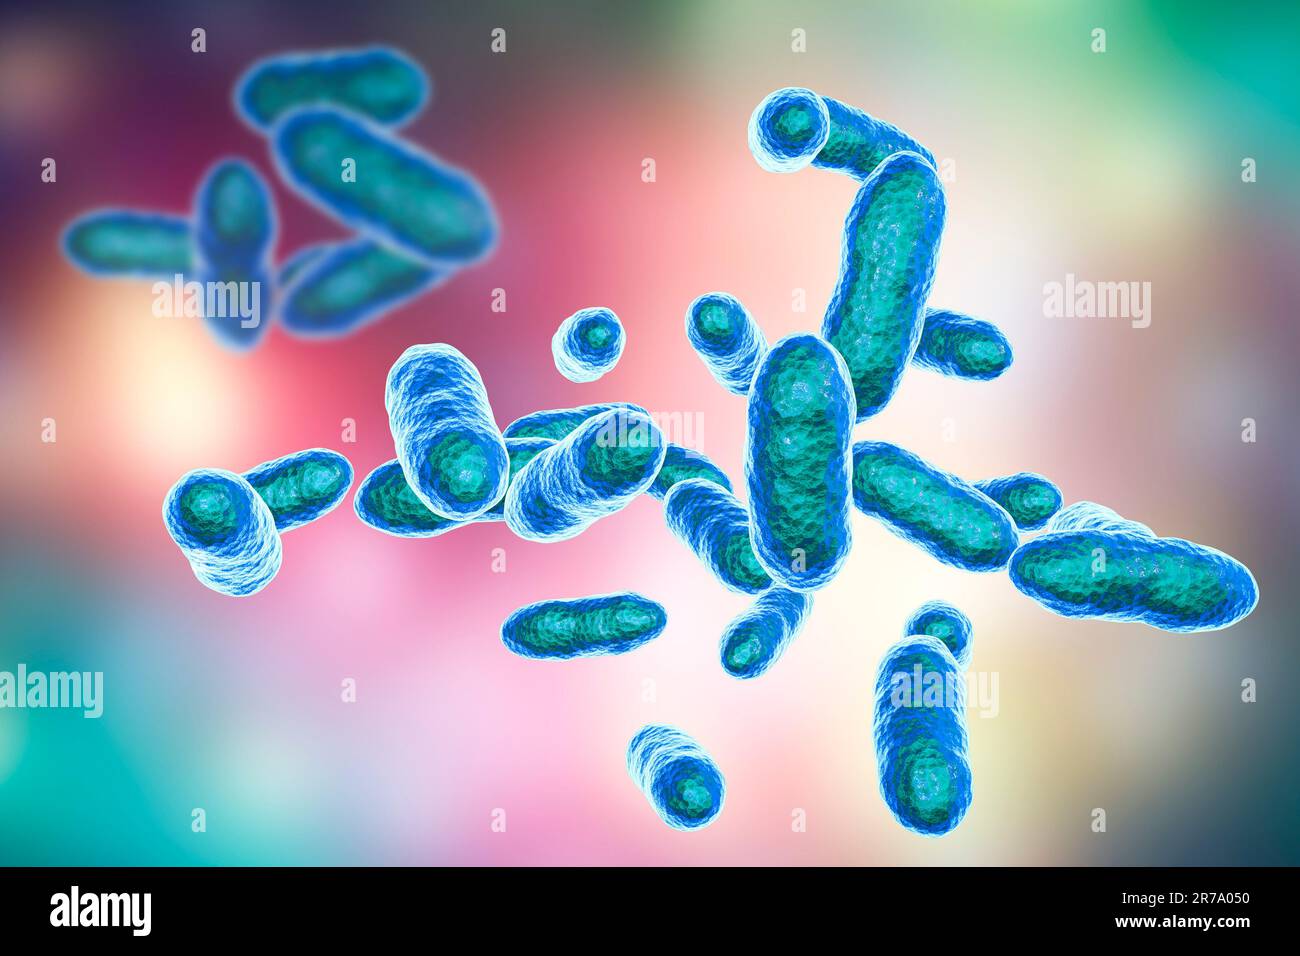 Tannerella forsythia bacteria, 3D illustration. Gram-negative anaerobic bacteria that cause periodontal diseases and have found to be associated with Stock Photo